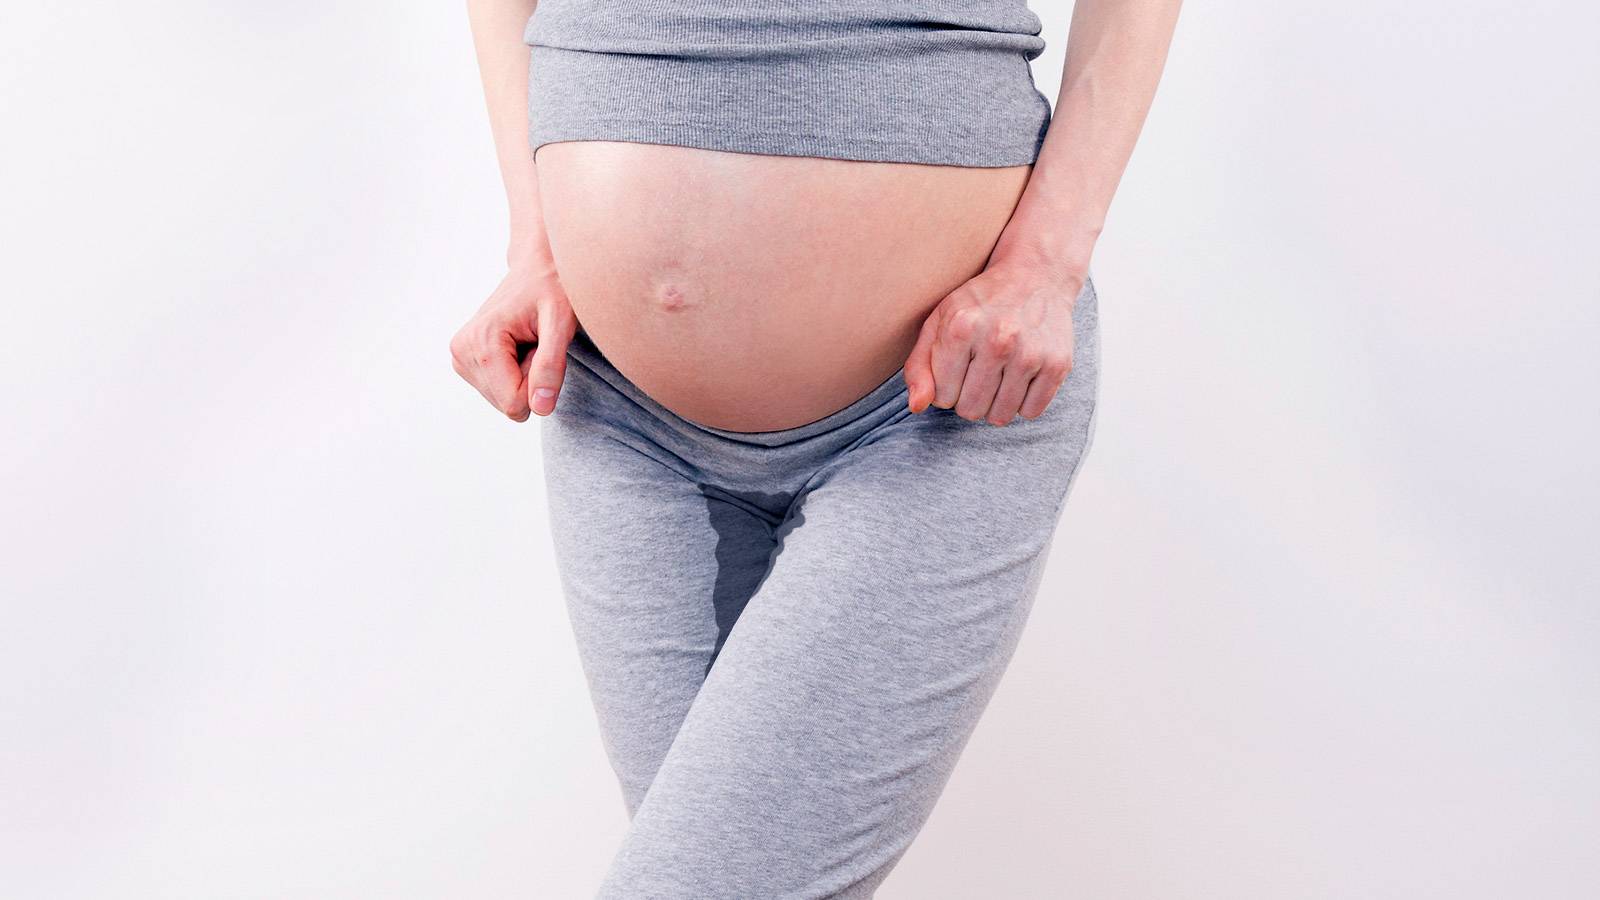 The kind of urinary incontinence a woman experiences during pregnancy is us...